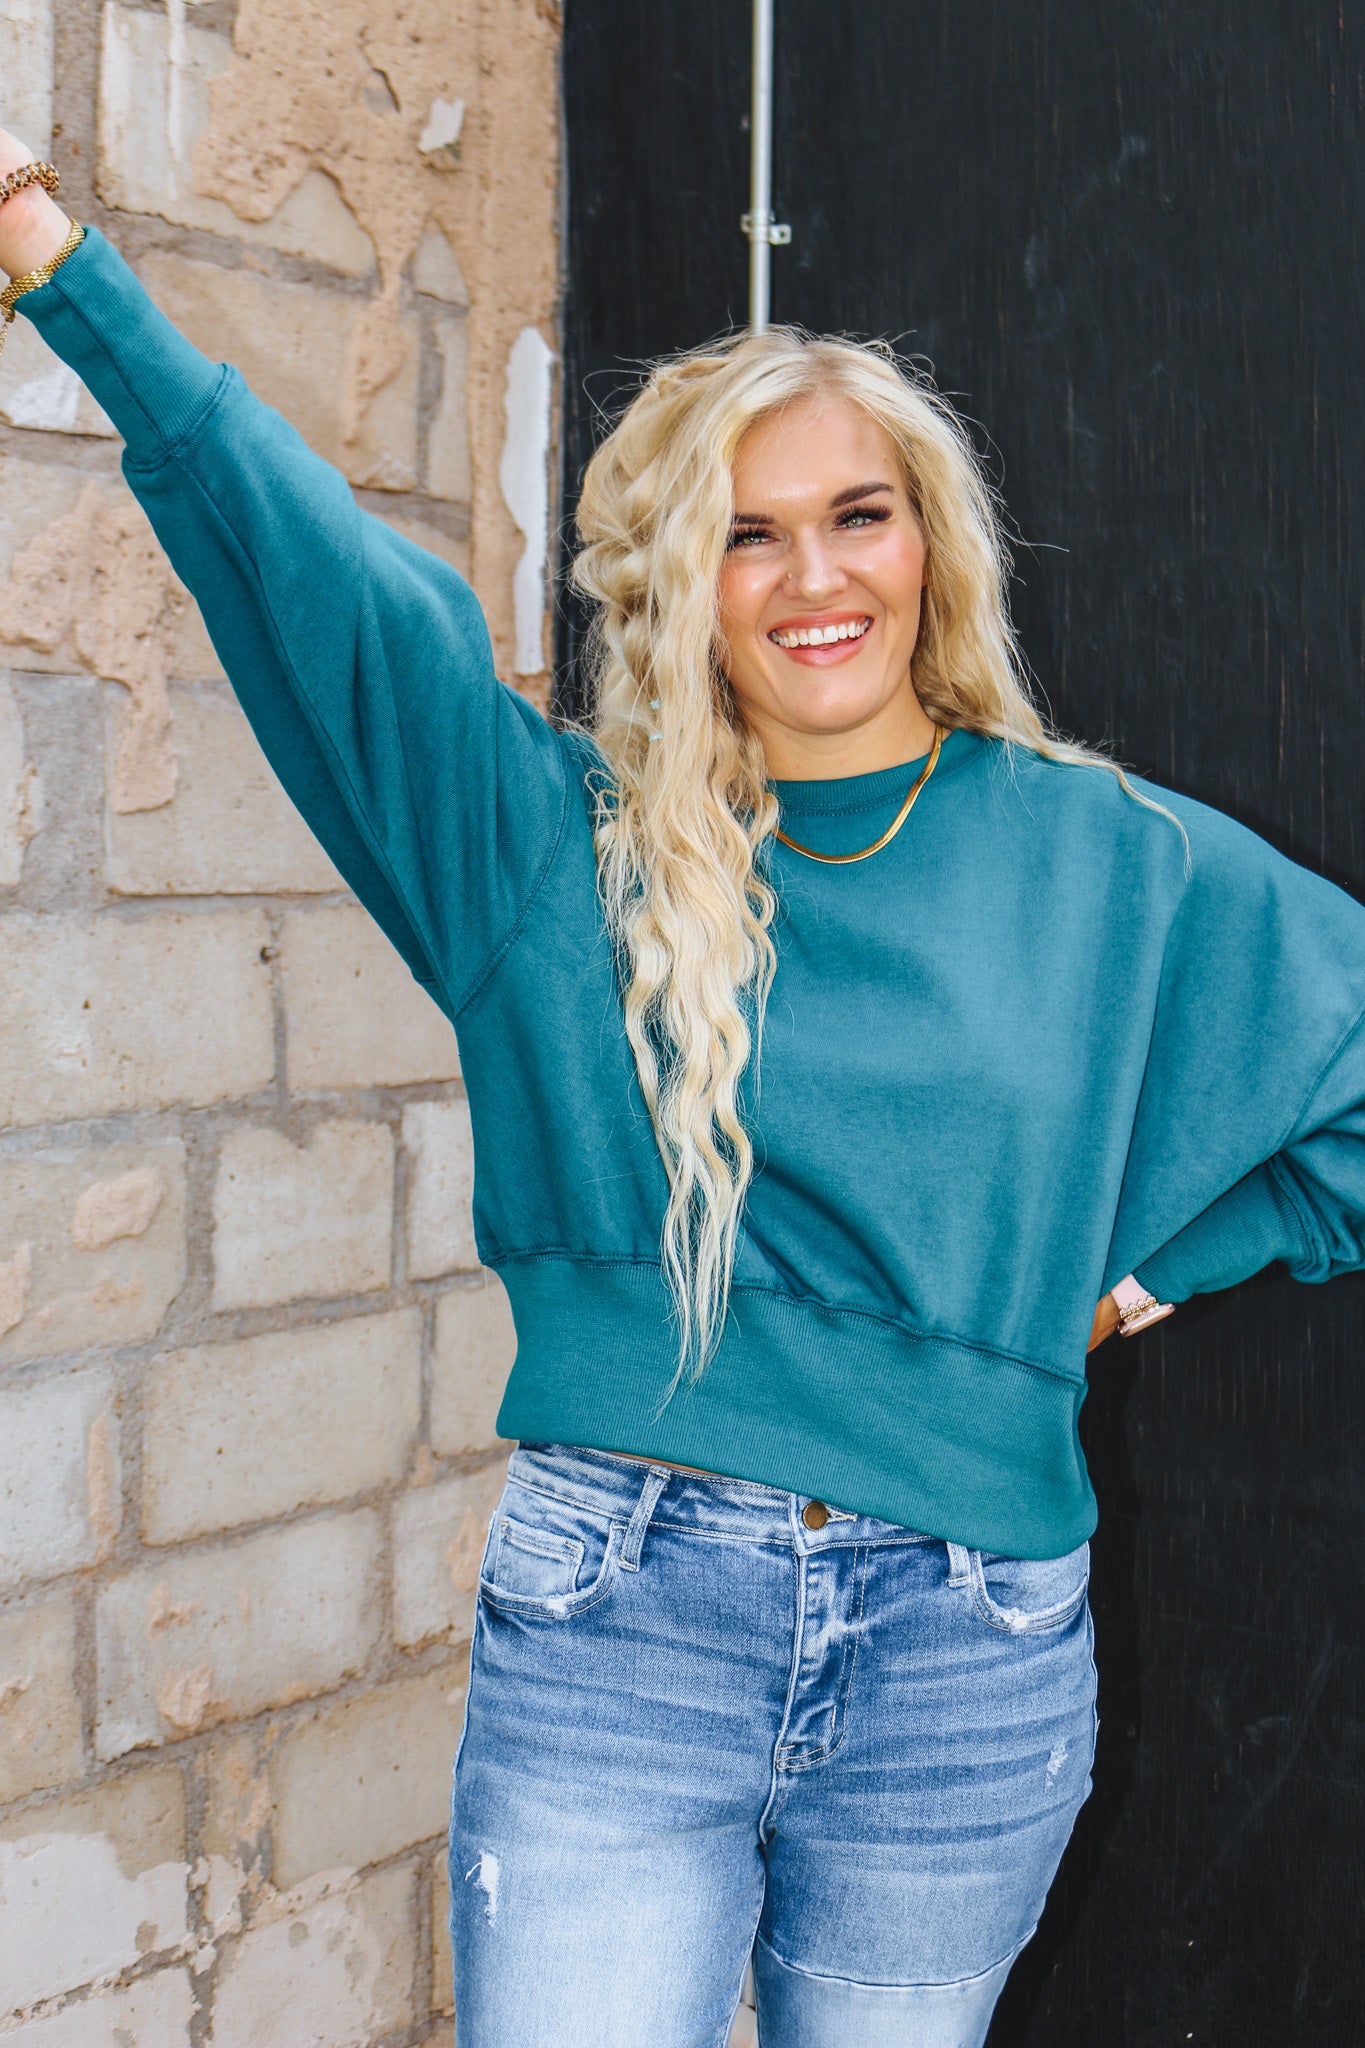 All About The Journey Emerald Sweatshirt